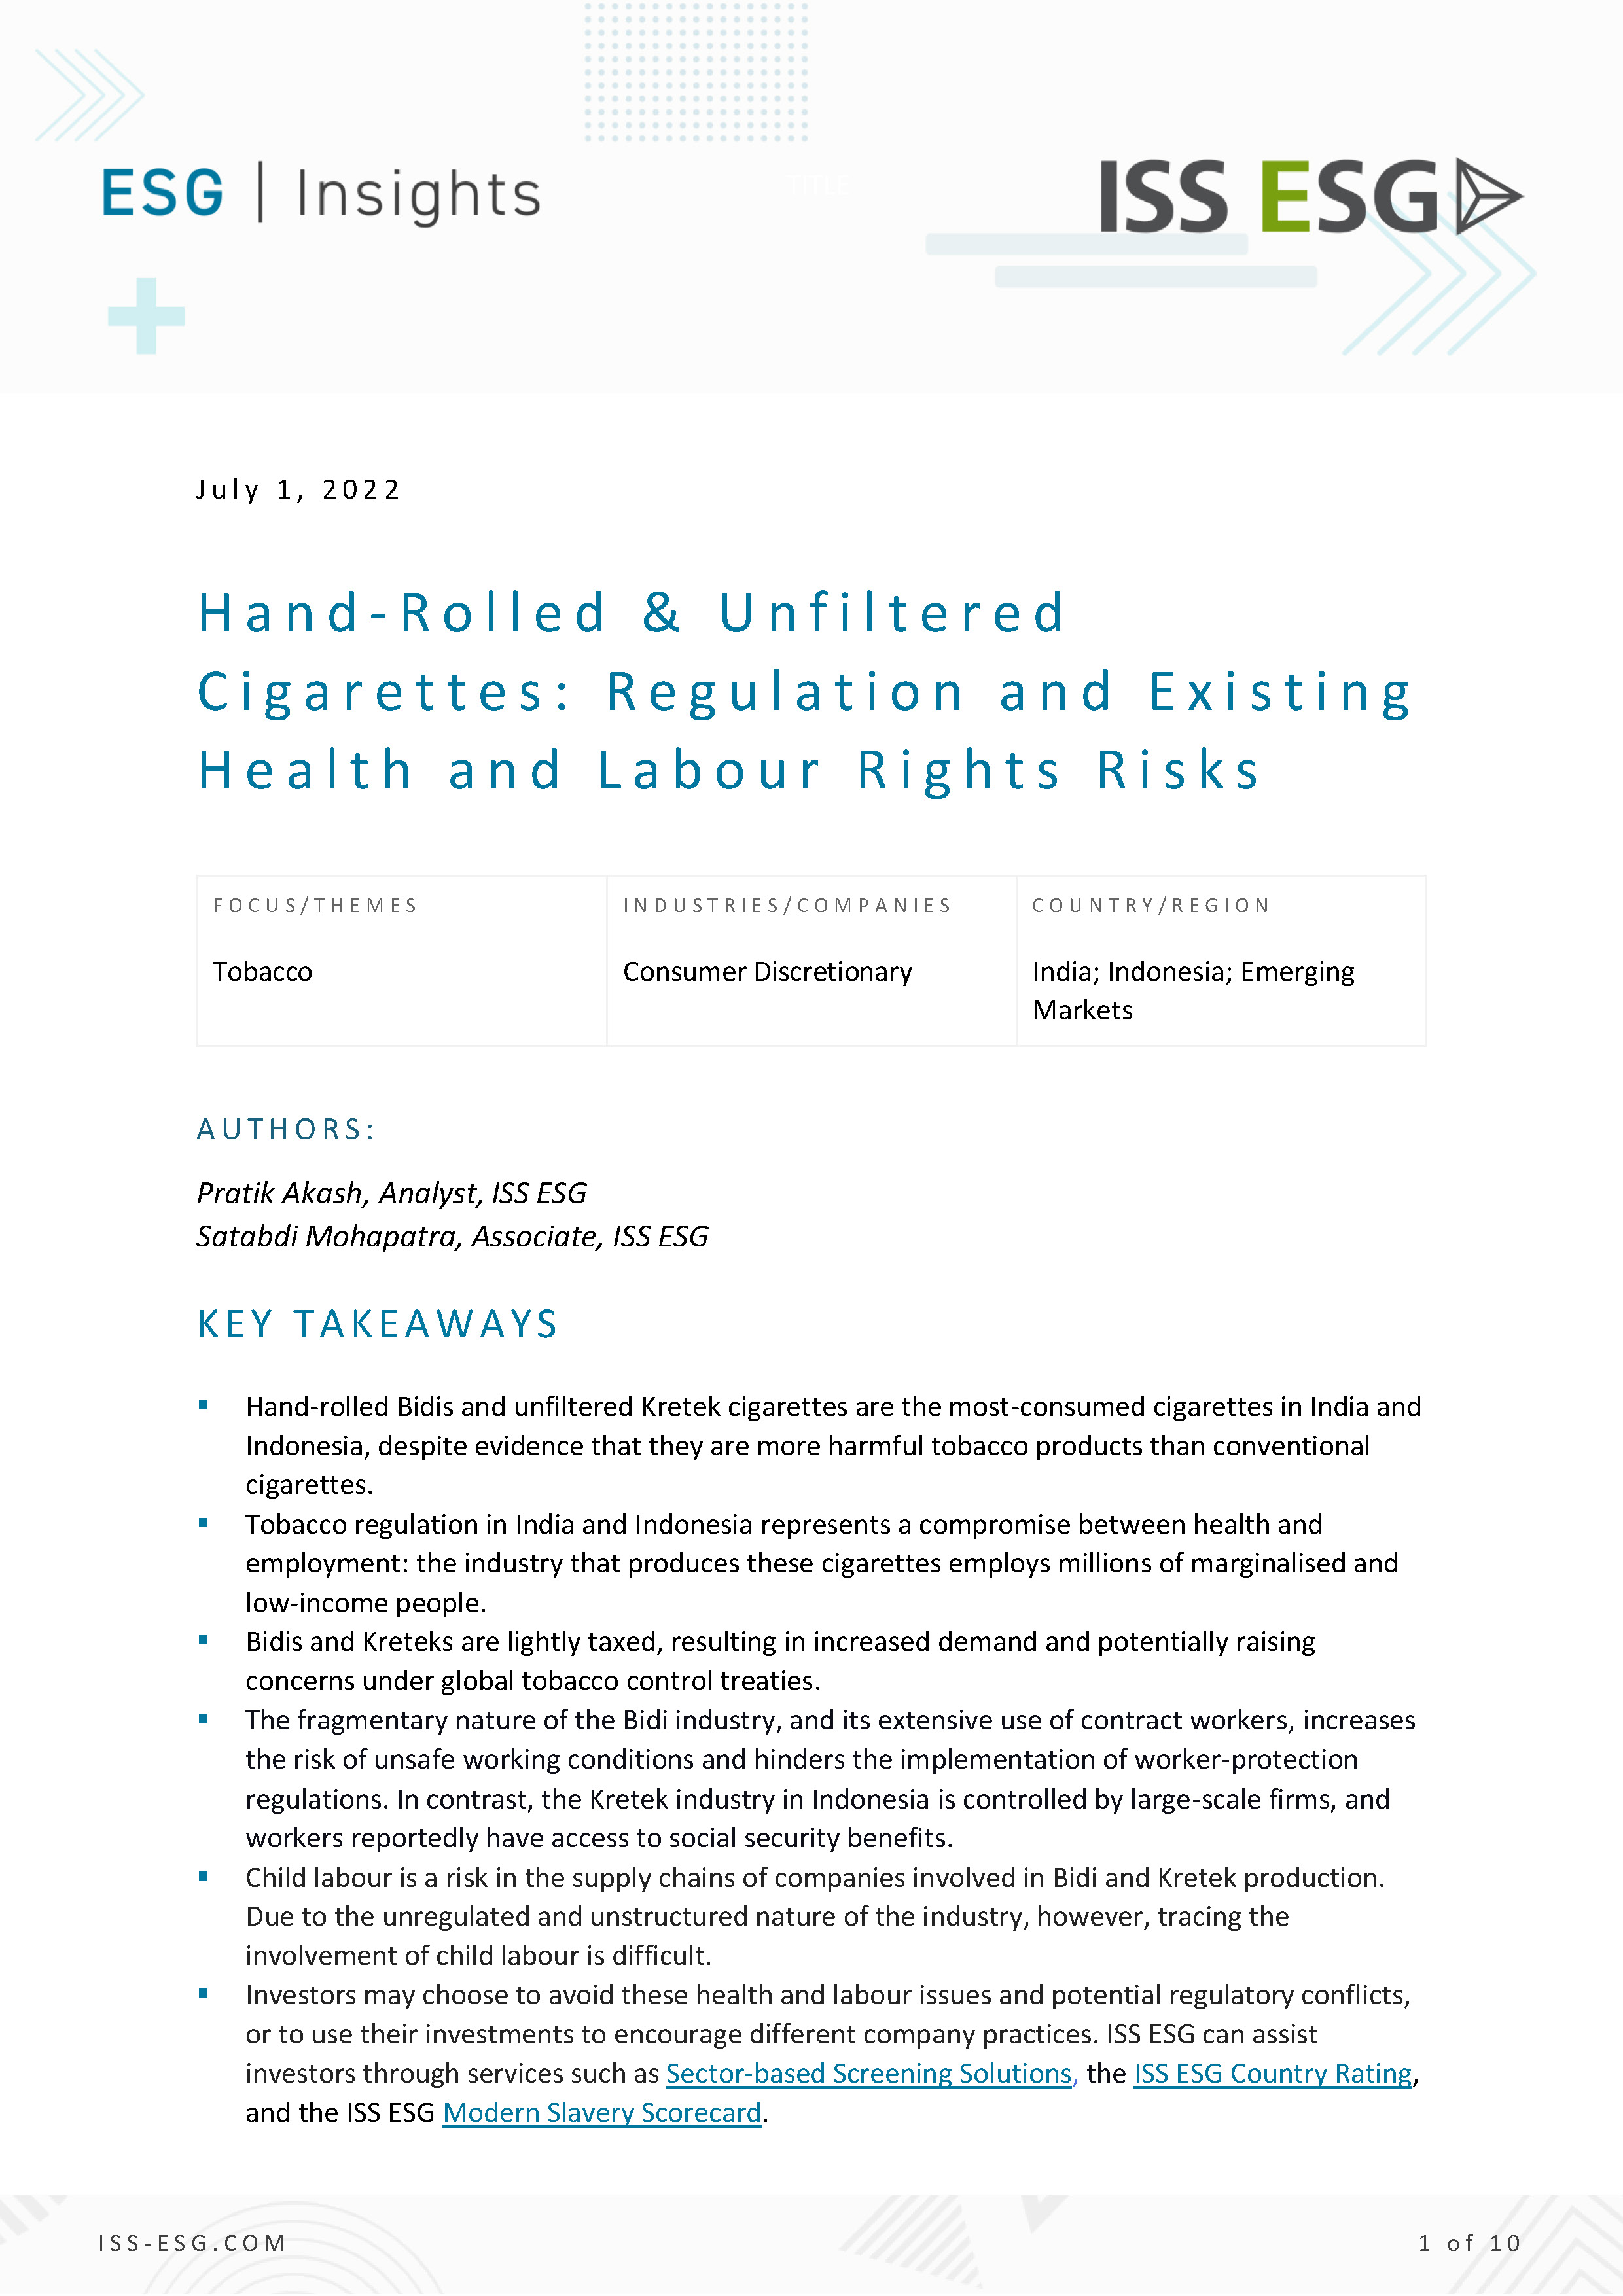 Hand-Rolled & Unfiltered Cigarettes: Regulation and Existing Health and Labour Rights Risks